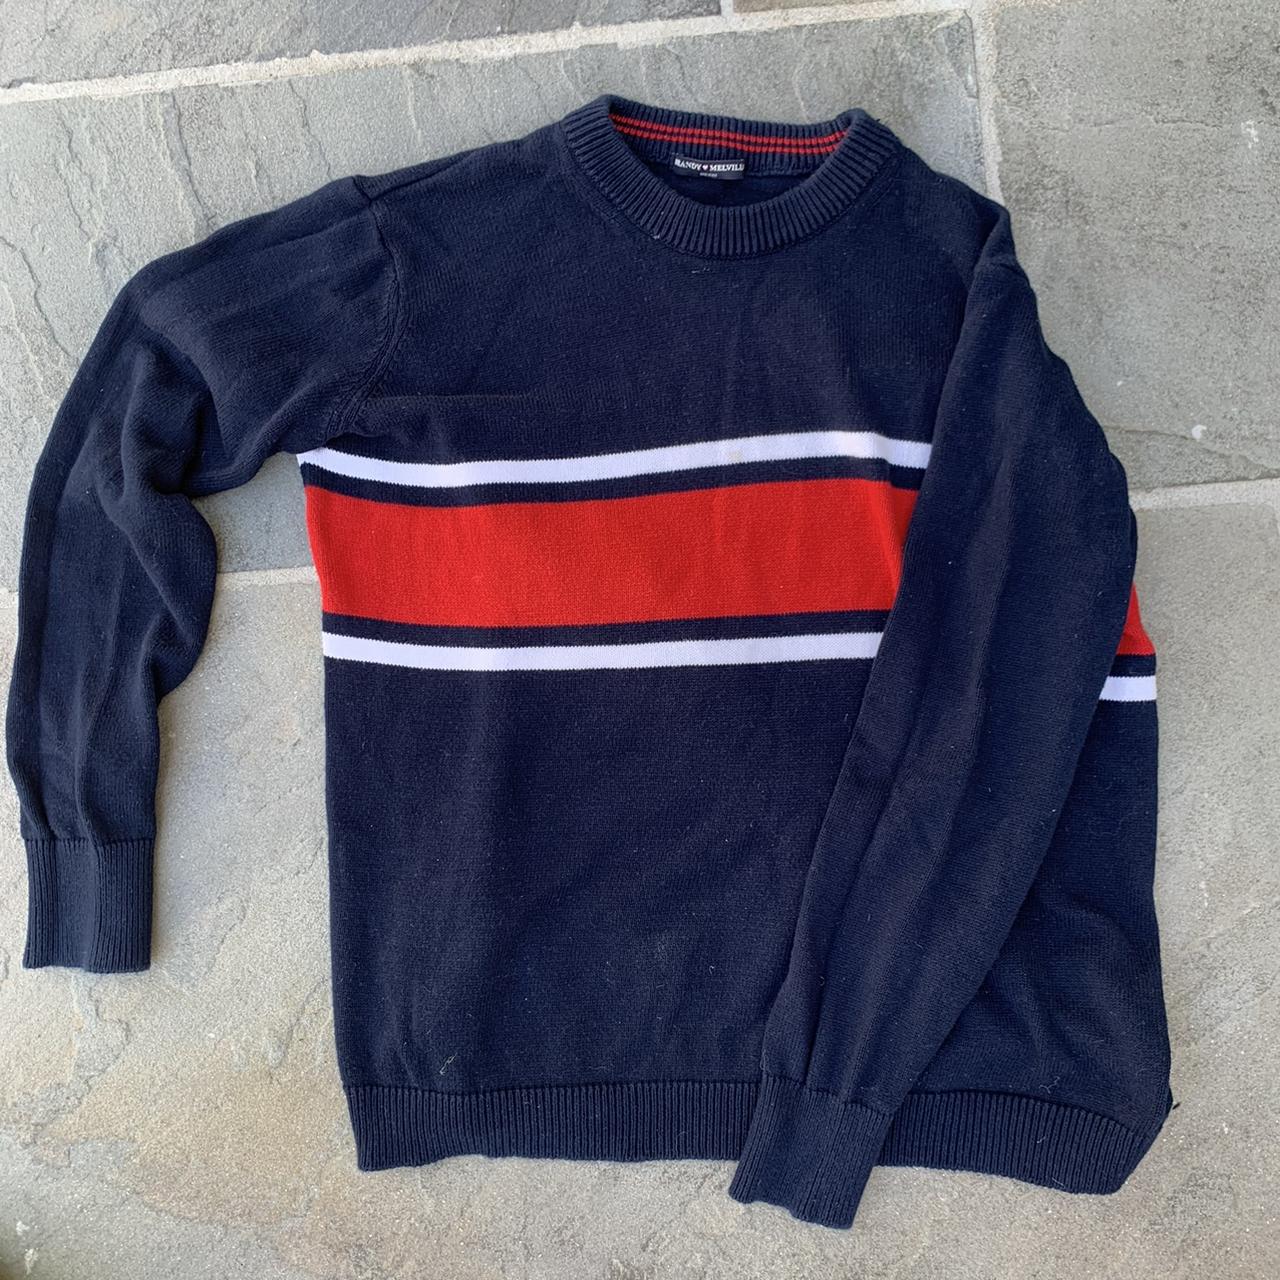 Brandy Melville Forth of July Red and Navy Stripe Bernadette Sweater